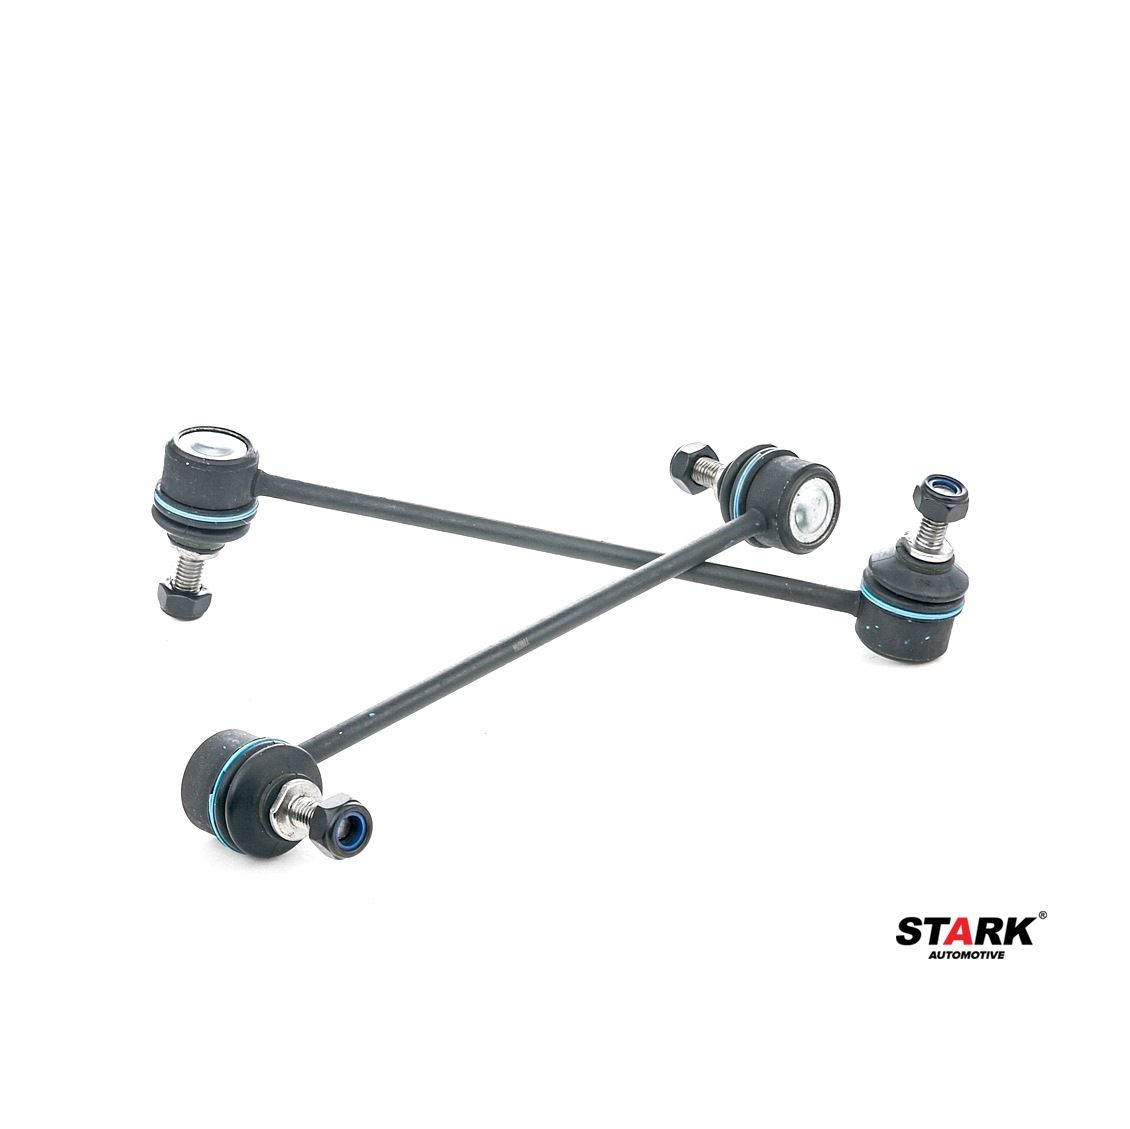 STARK SKRKS-4420024 Repair Kit, stabilizer coupling rod Front Axle Left, Front Axle Right